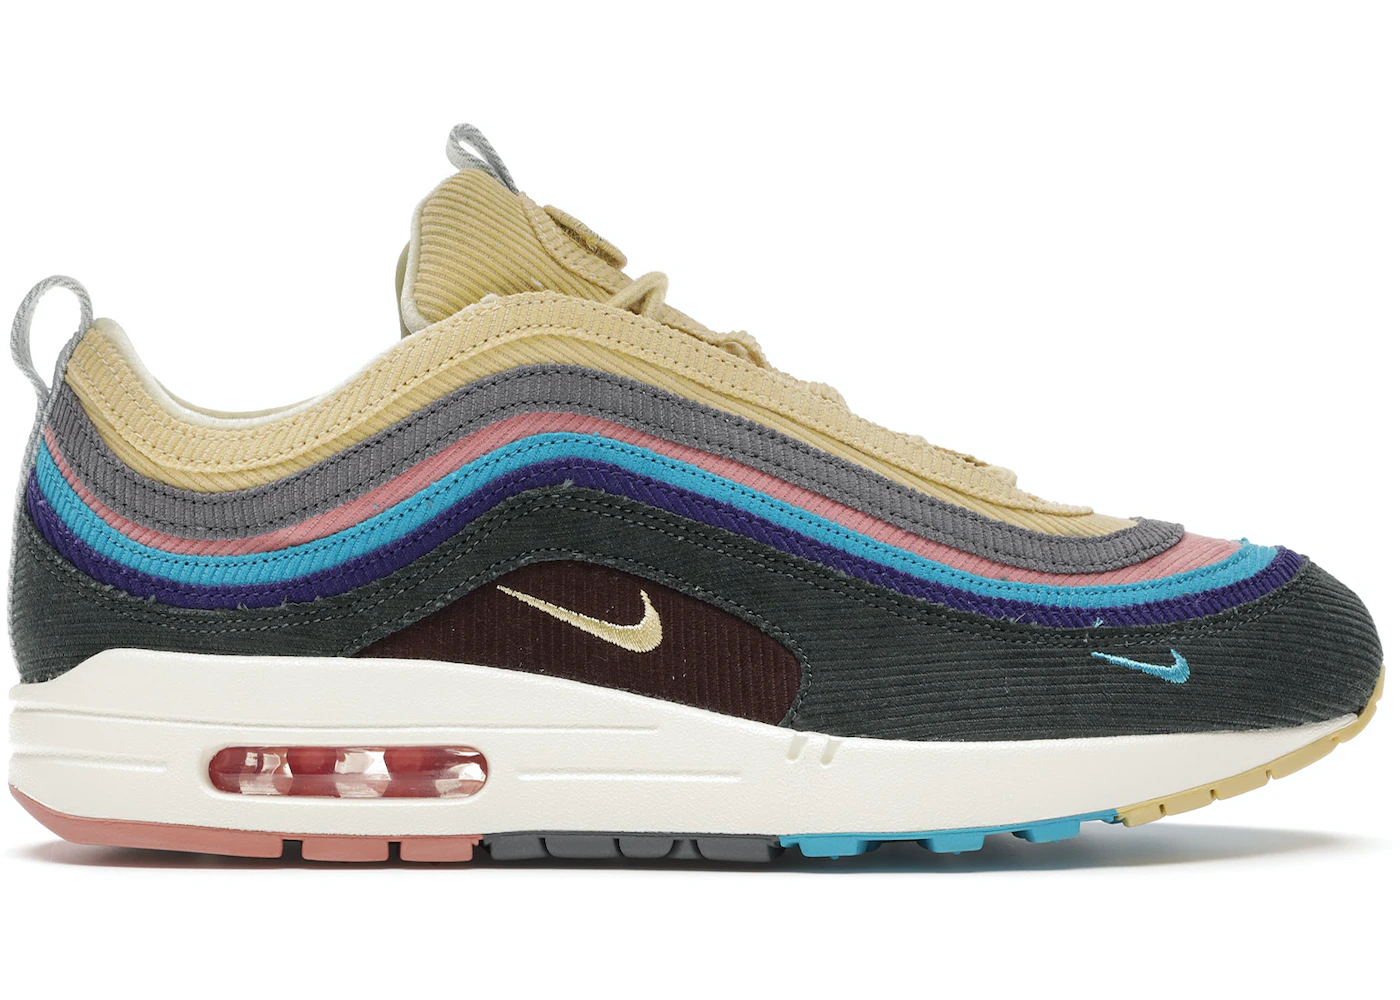 Air 1/97 Sean Wotherspoon (All Accessories and - AJ4219-400 - US